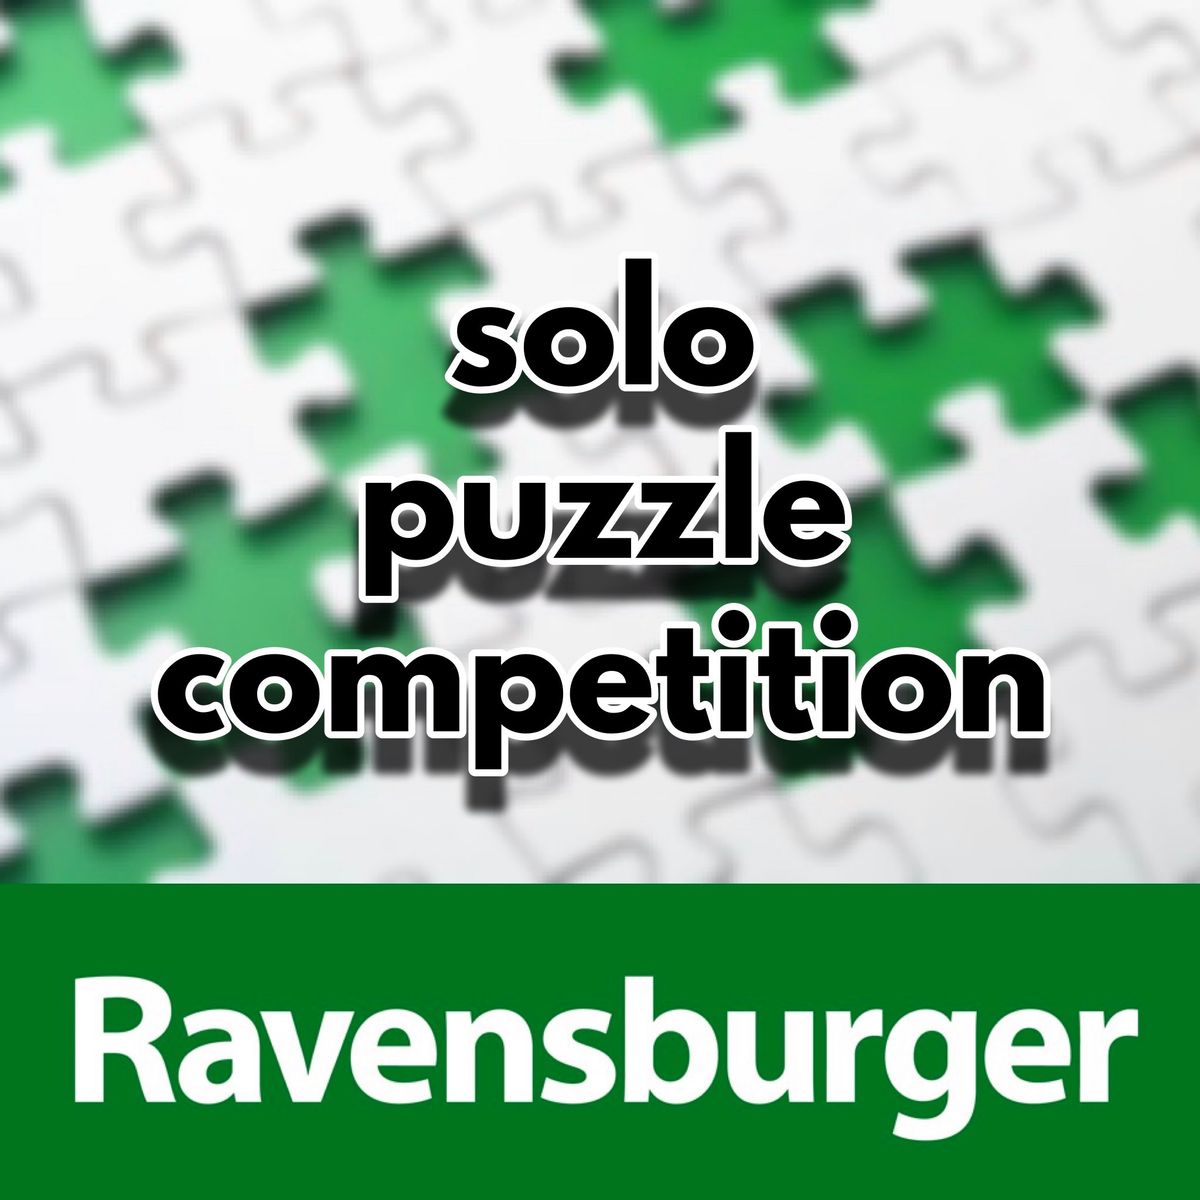 Ravensburger Puzzle Competition: Solo Round